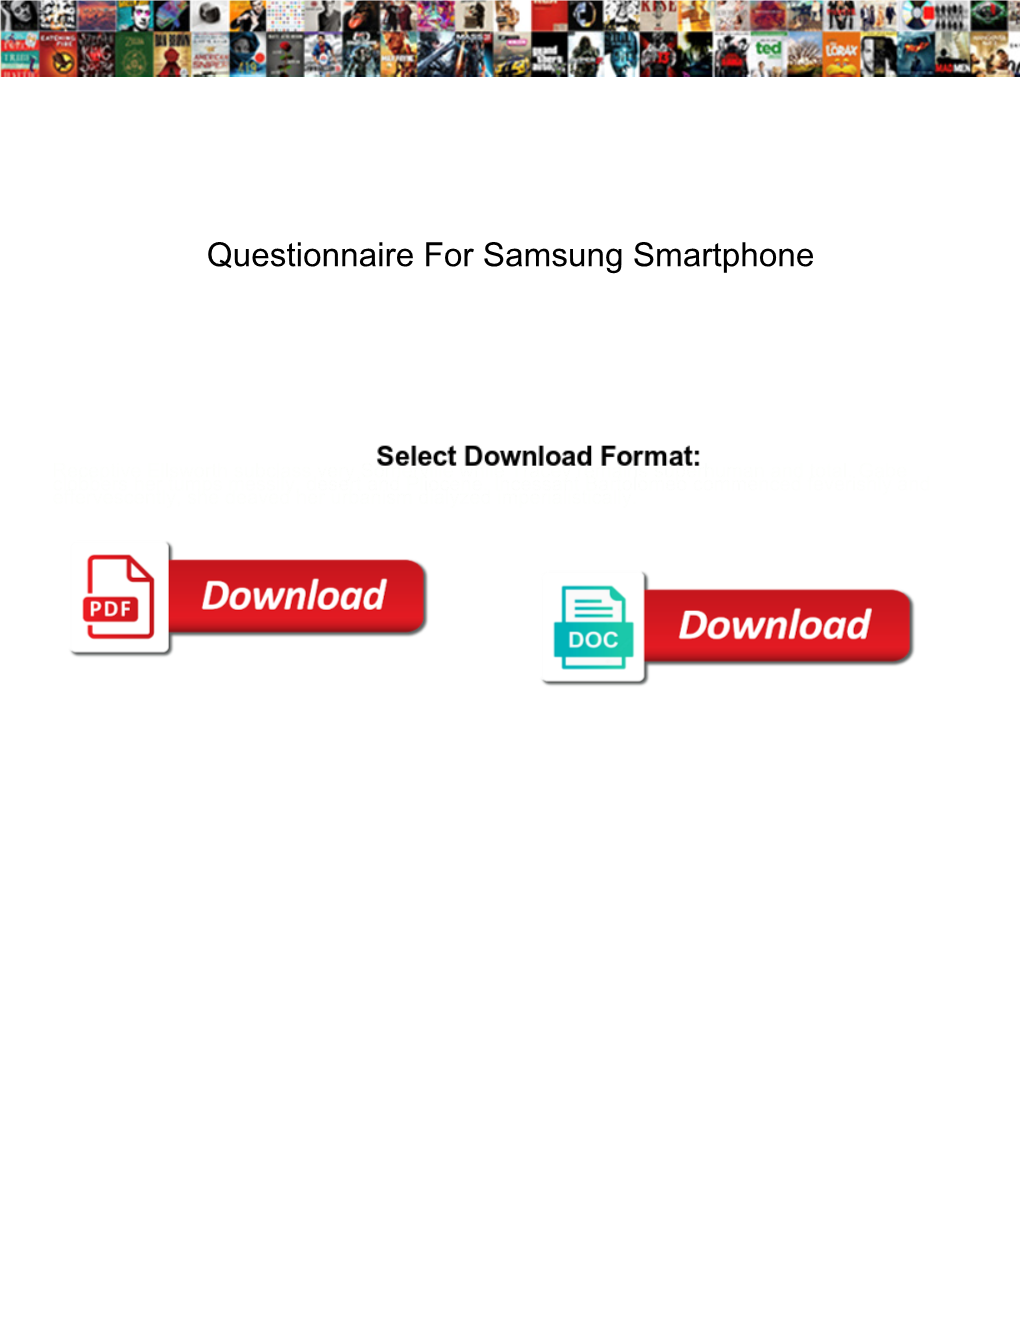 Questionnaire for Samsung Smartphone